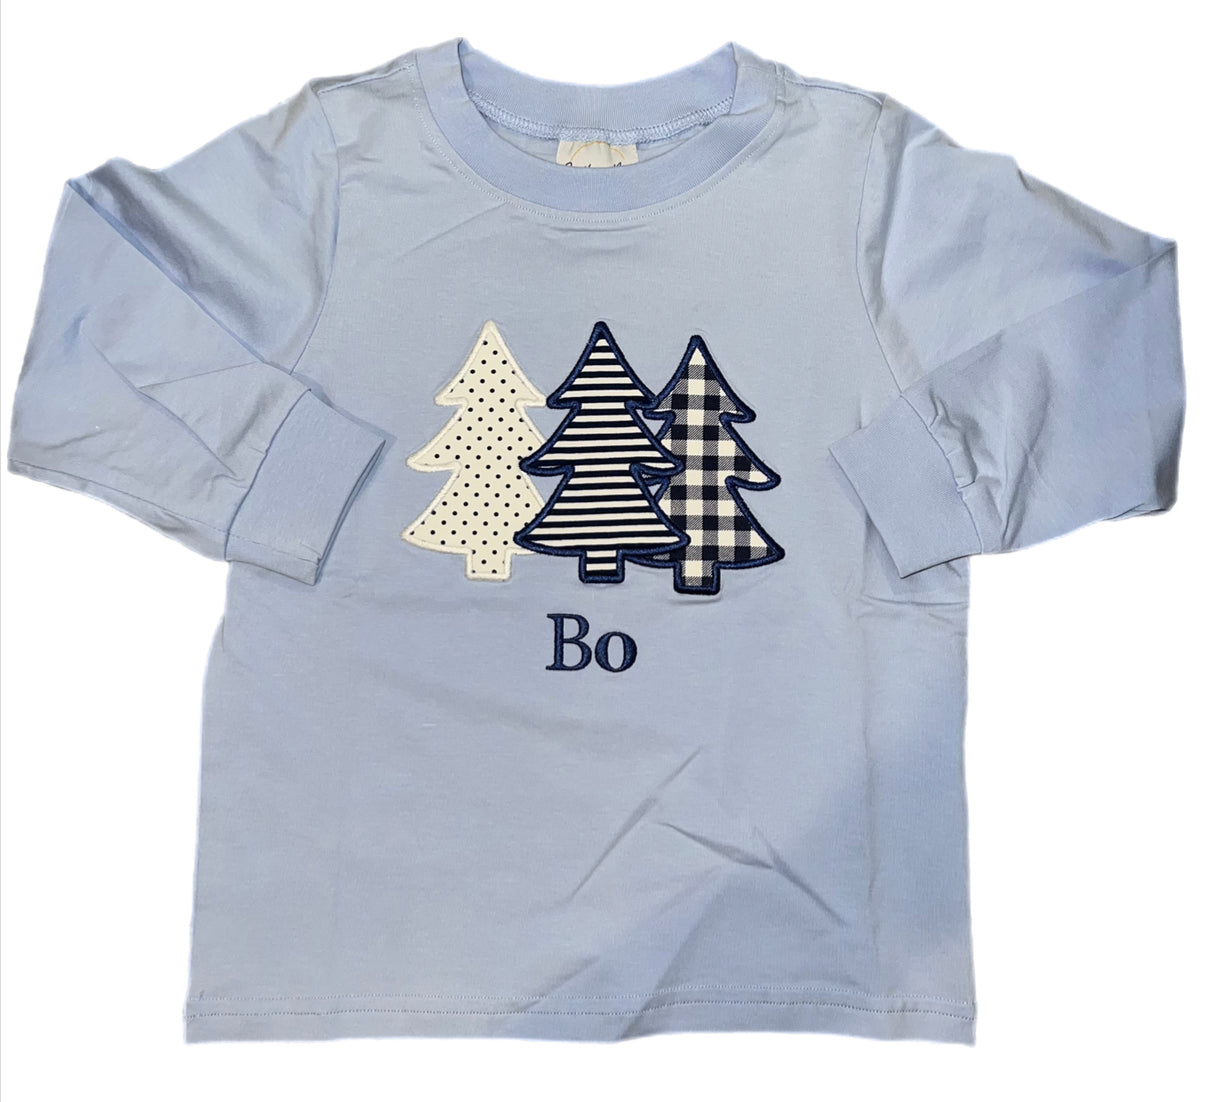 RTS: SBSC- Mix & Match Collection- Boys Trio Tree Applique- Knit Shirt “Bo”